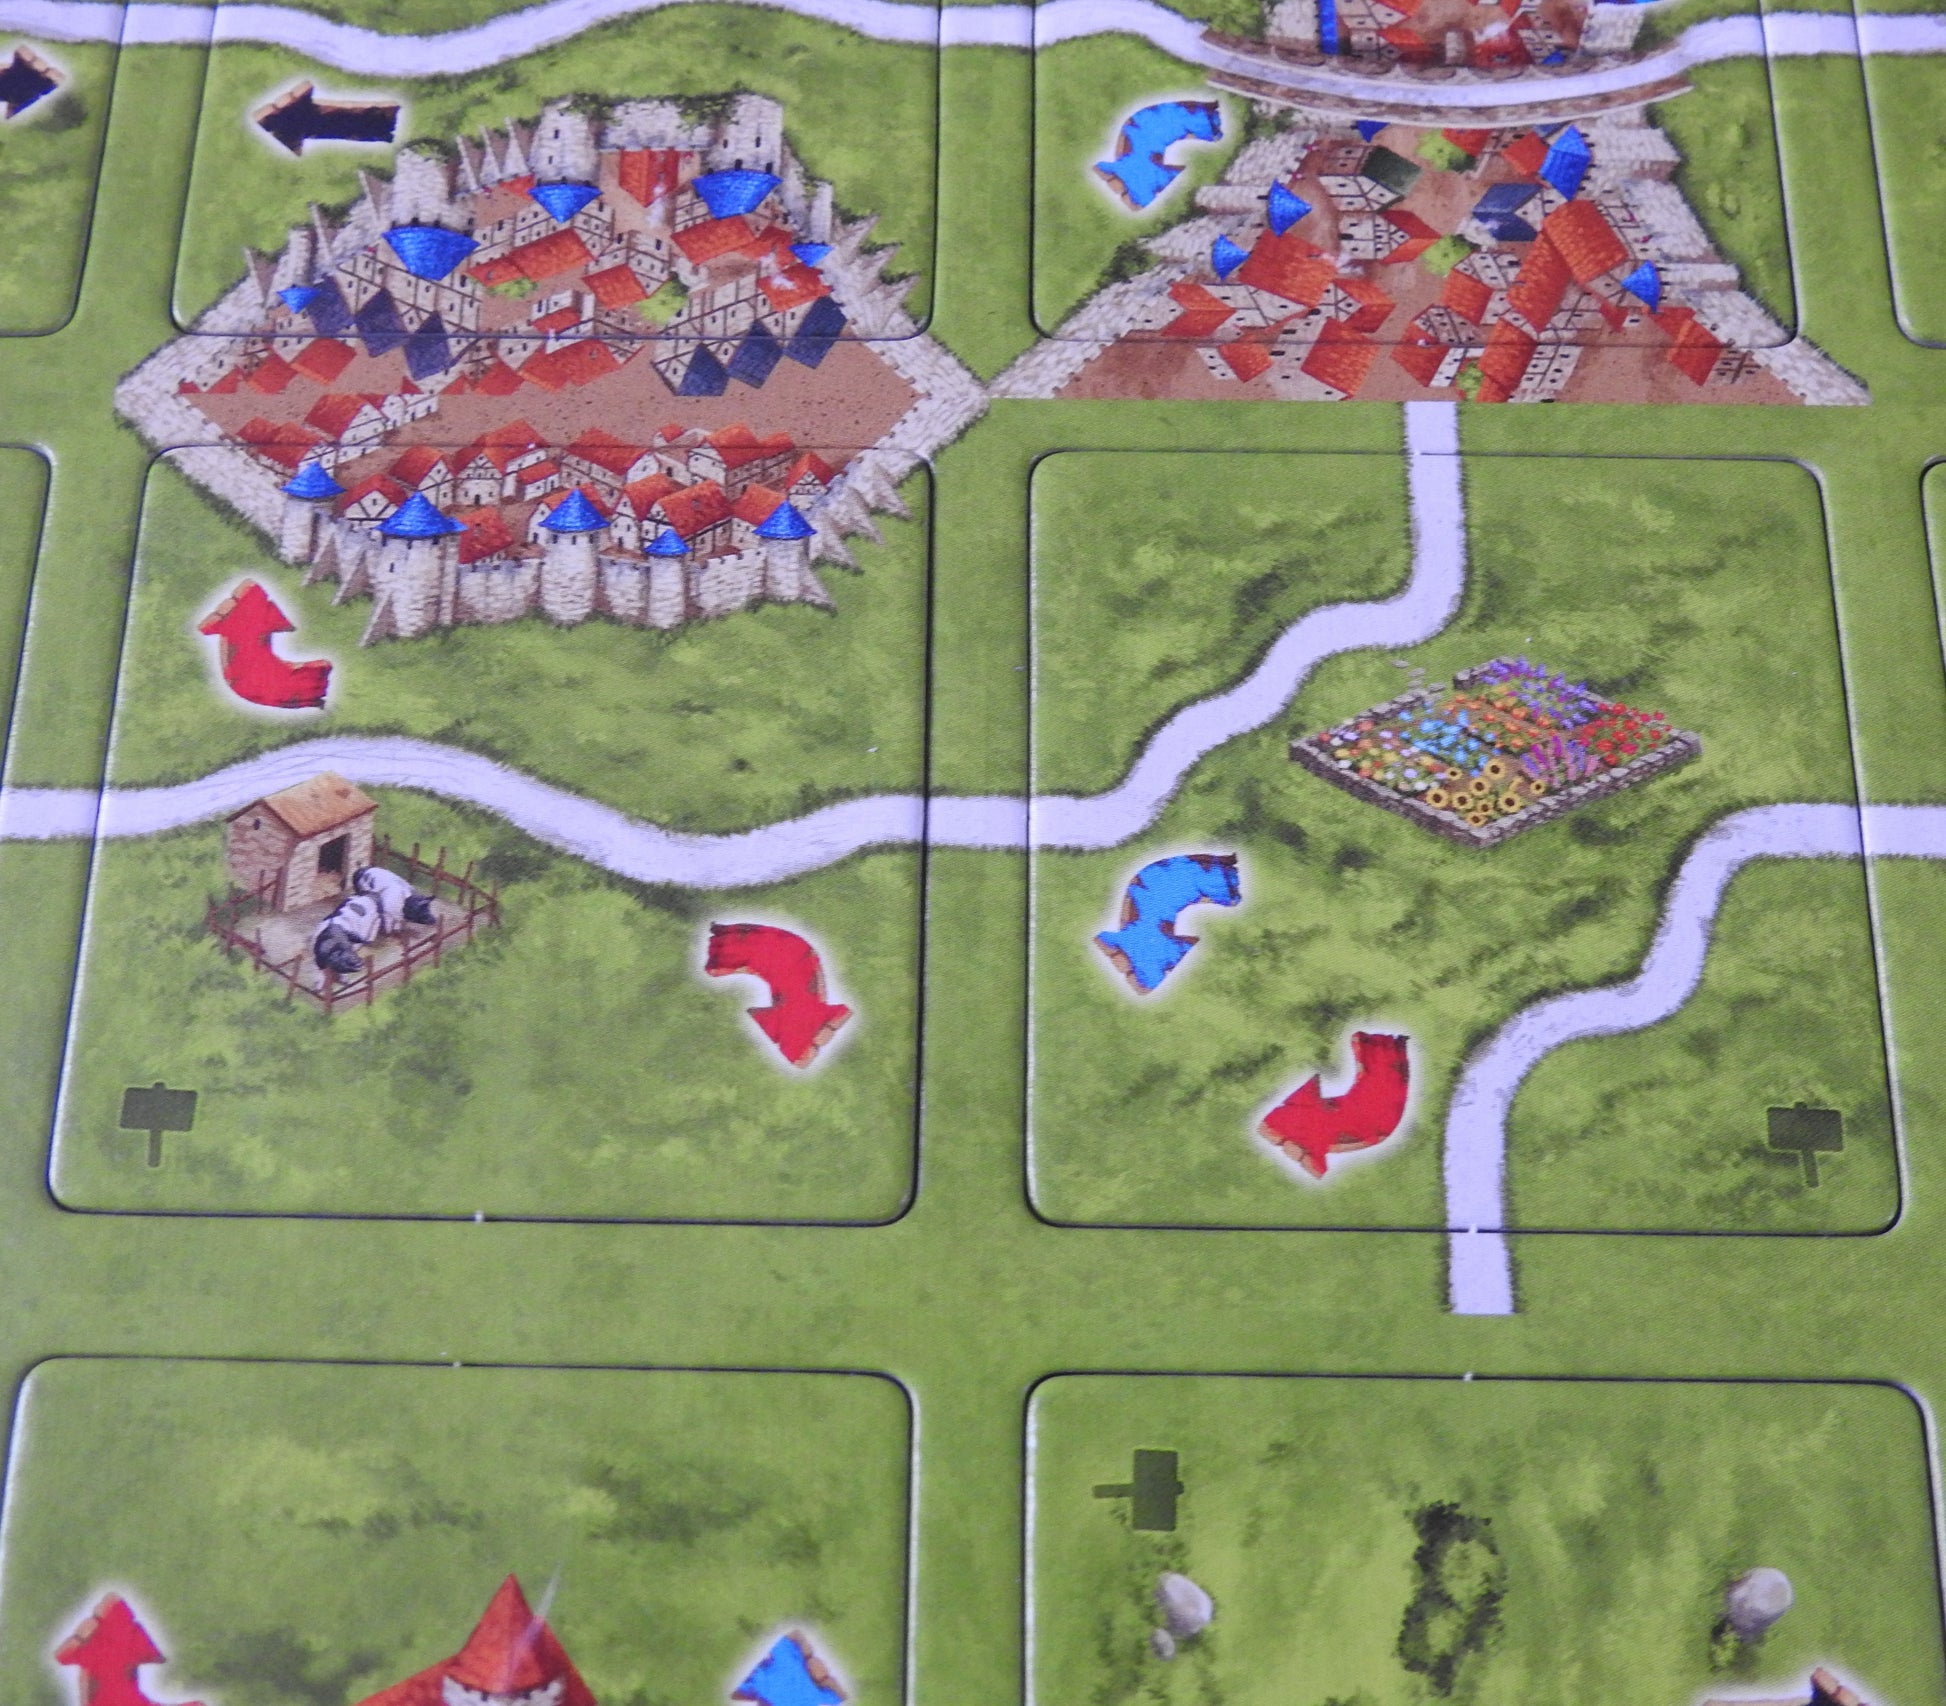 Closer view of two of the included tiles, with arrows pointing in different directions.